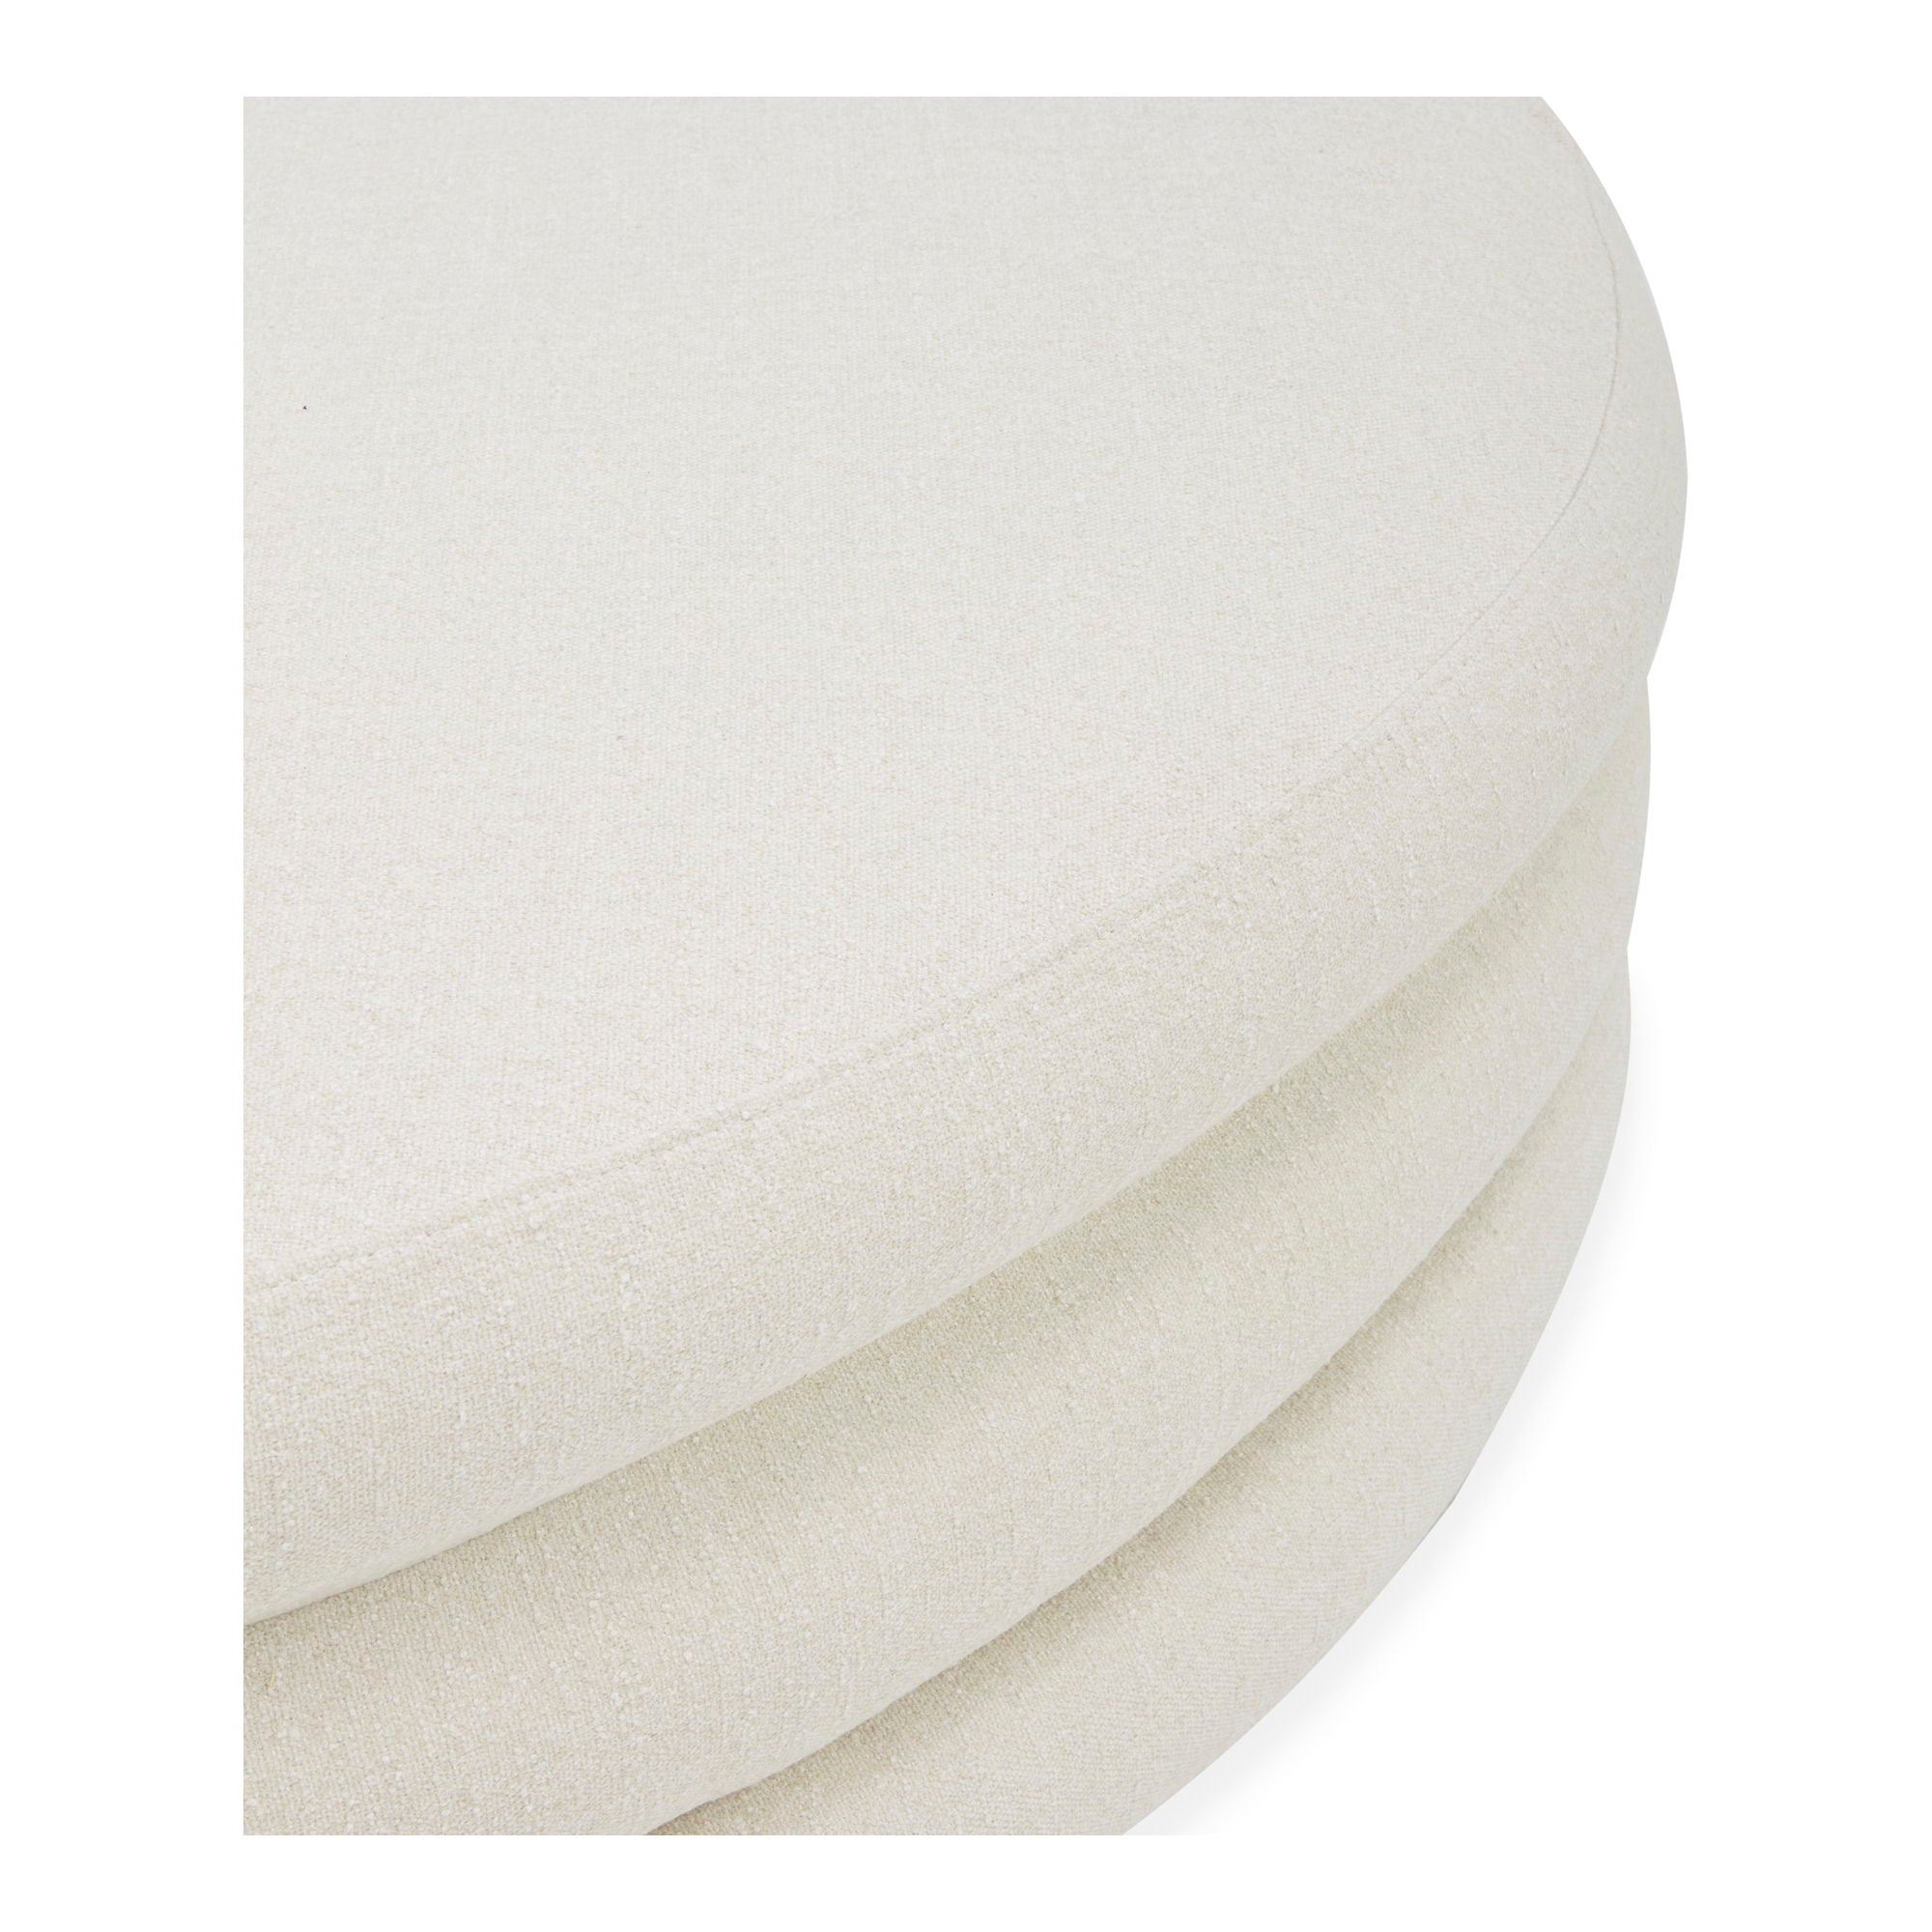 Lowtide - Curved Ottoman - White